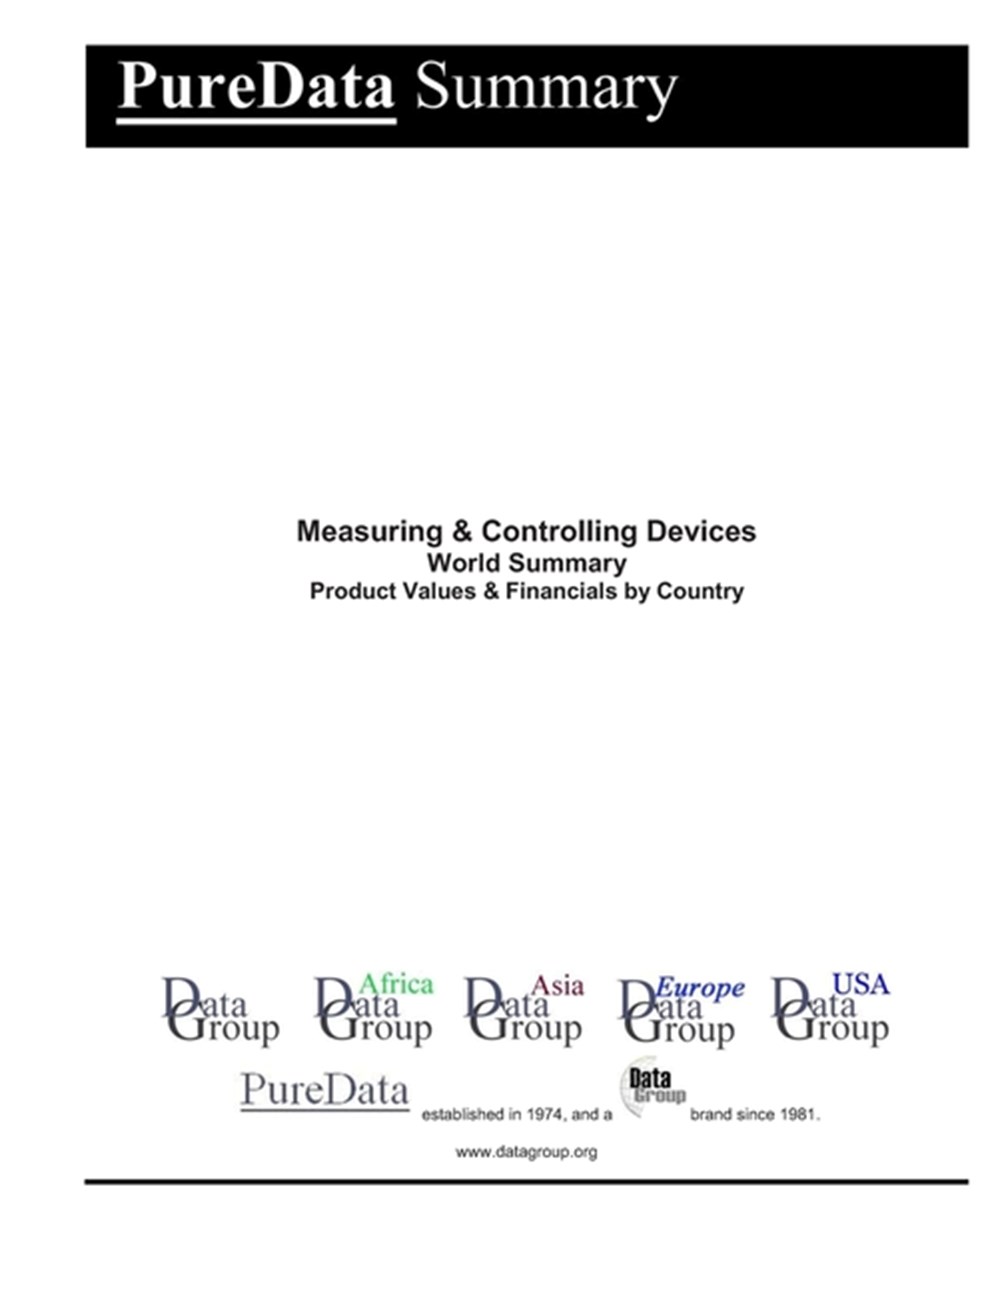 Measuring & Controlling Devices World Summary Product Values & Financials by Country